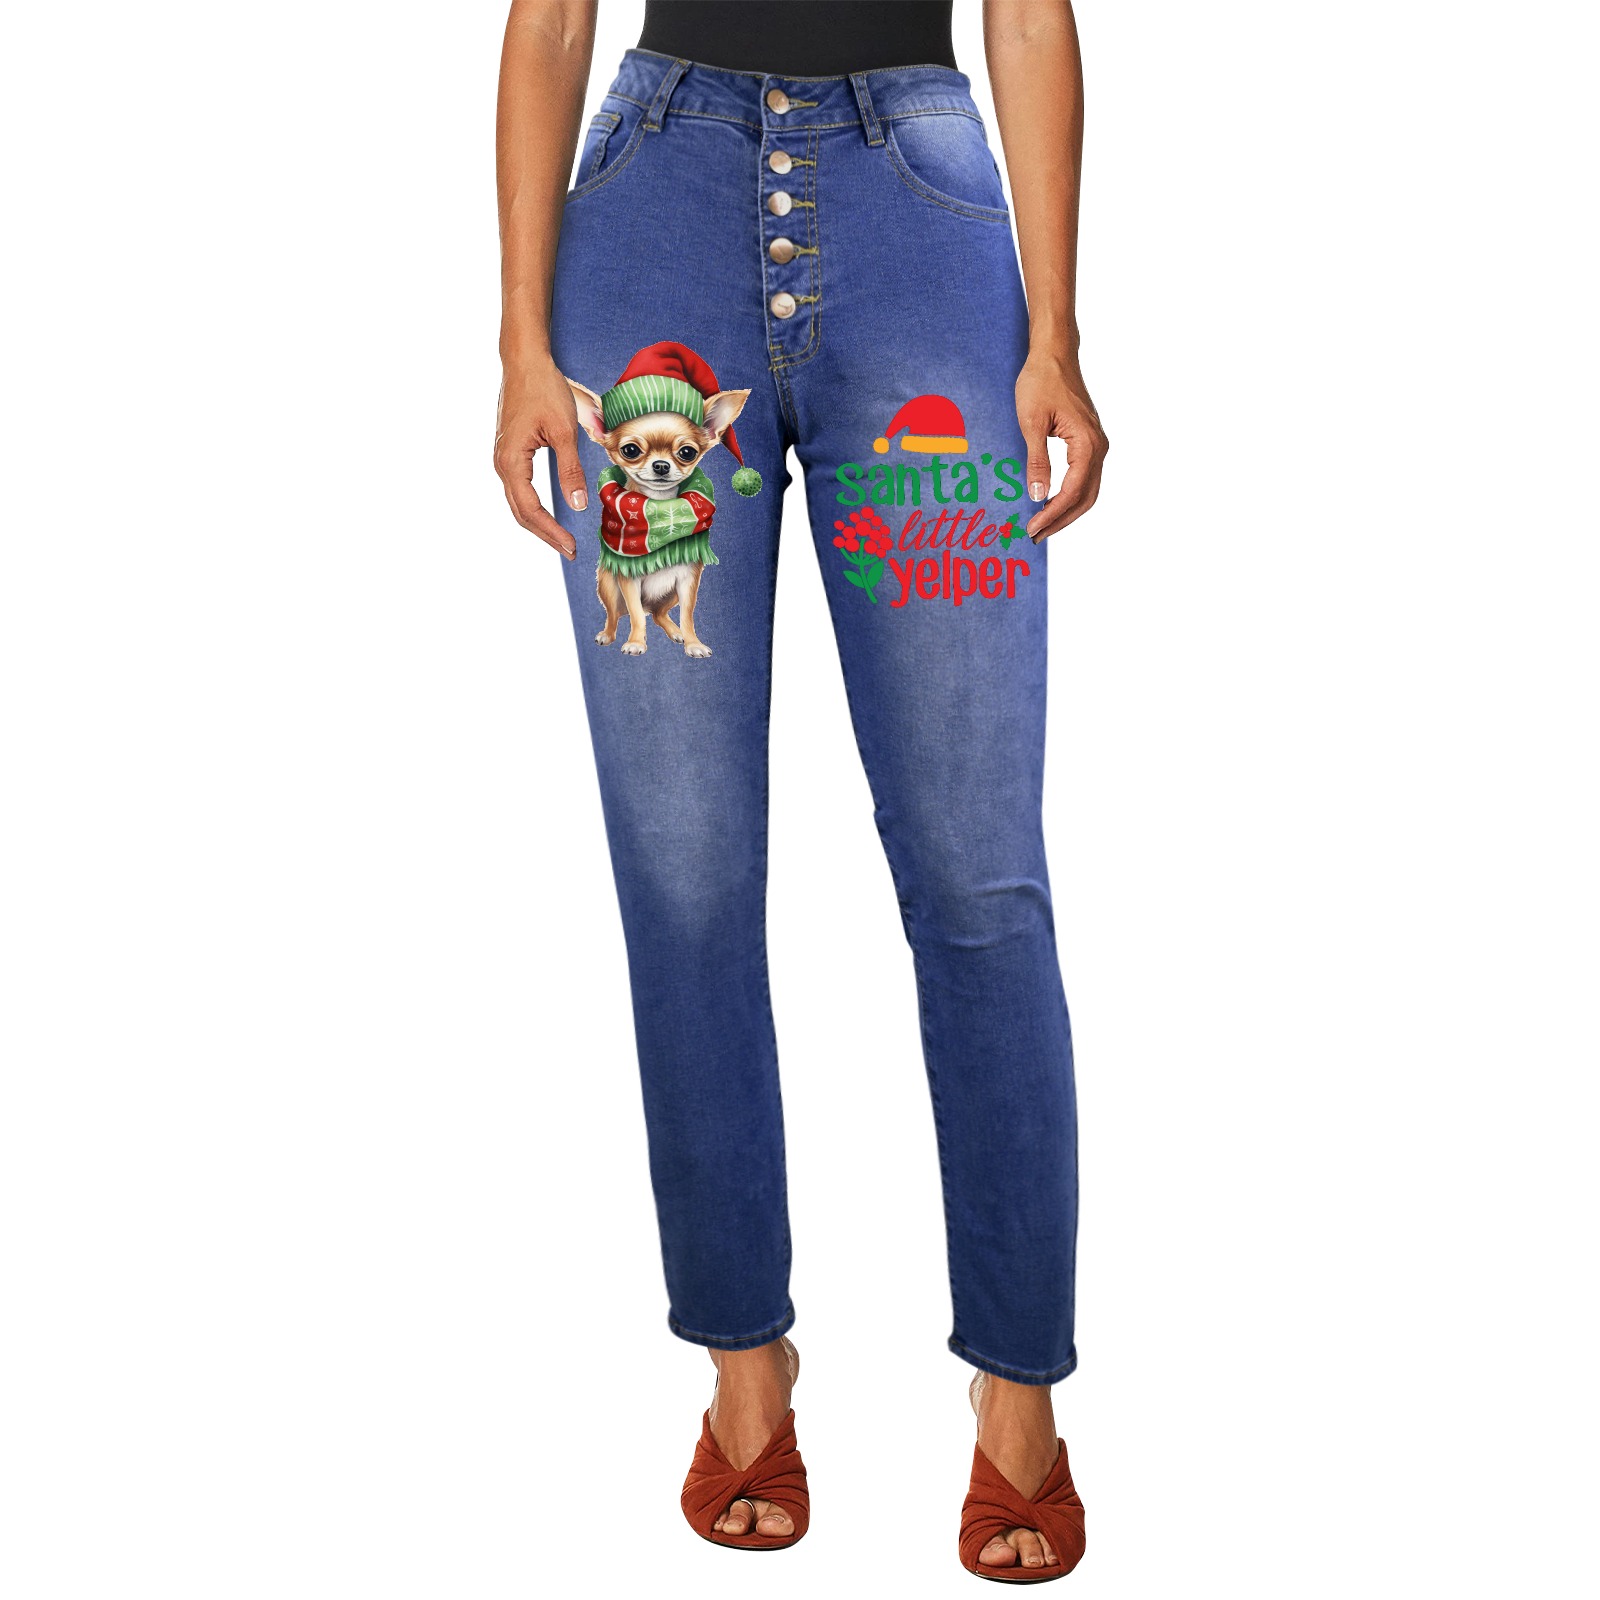 Santa's little Helper Chihuahua Women's Jeans (Front Printing)